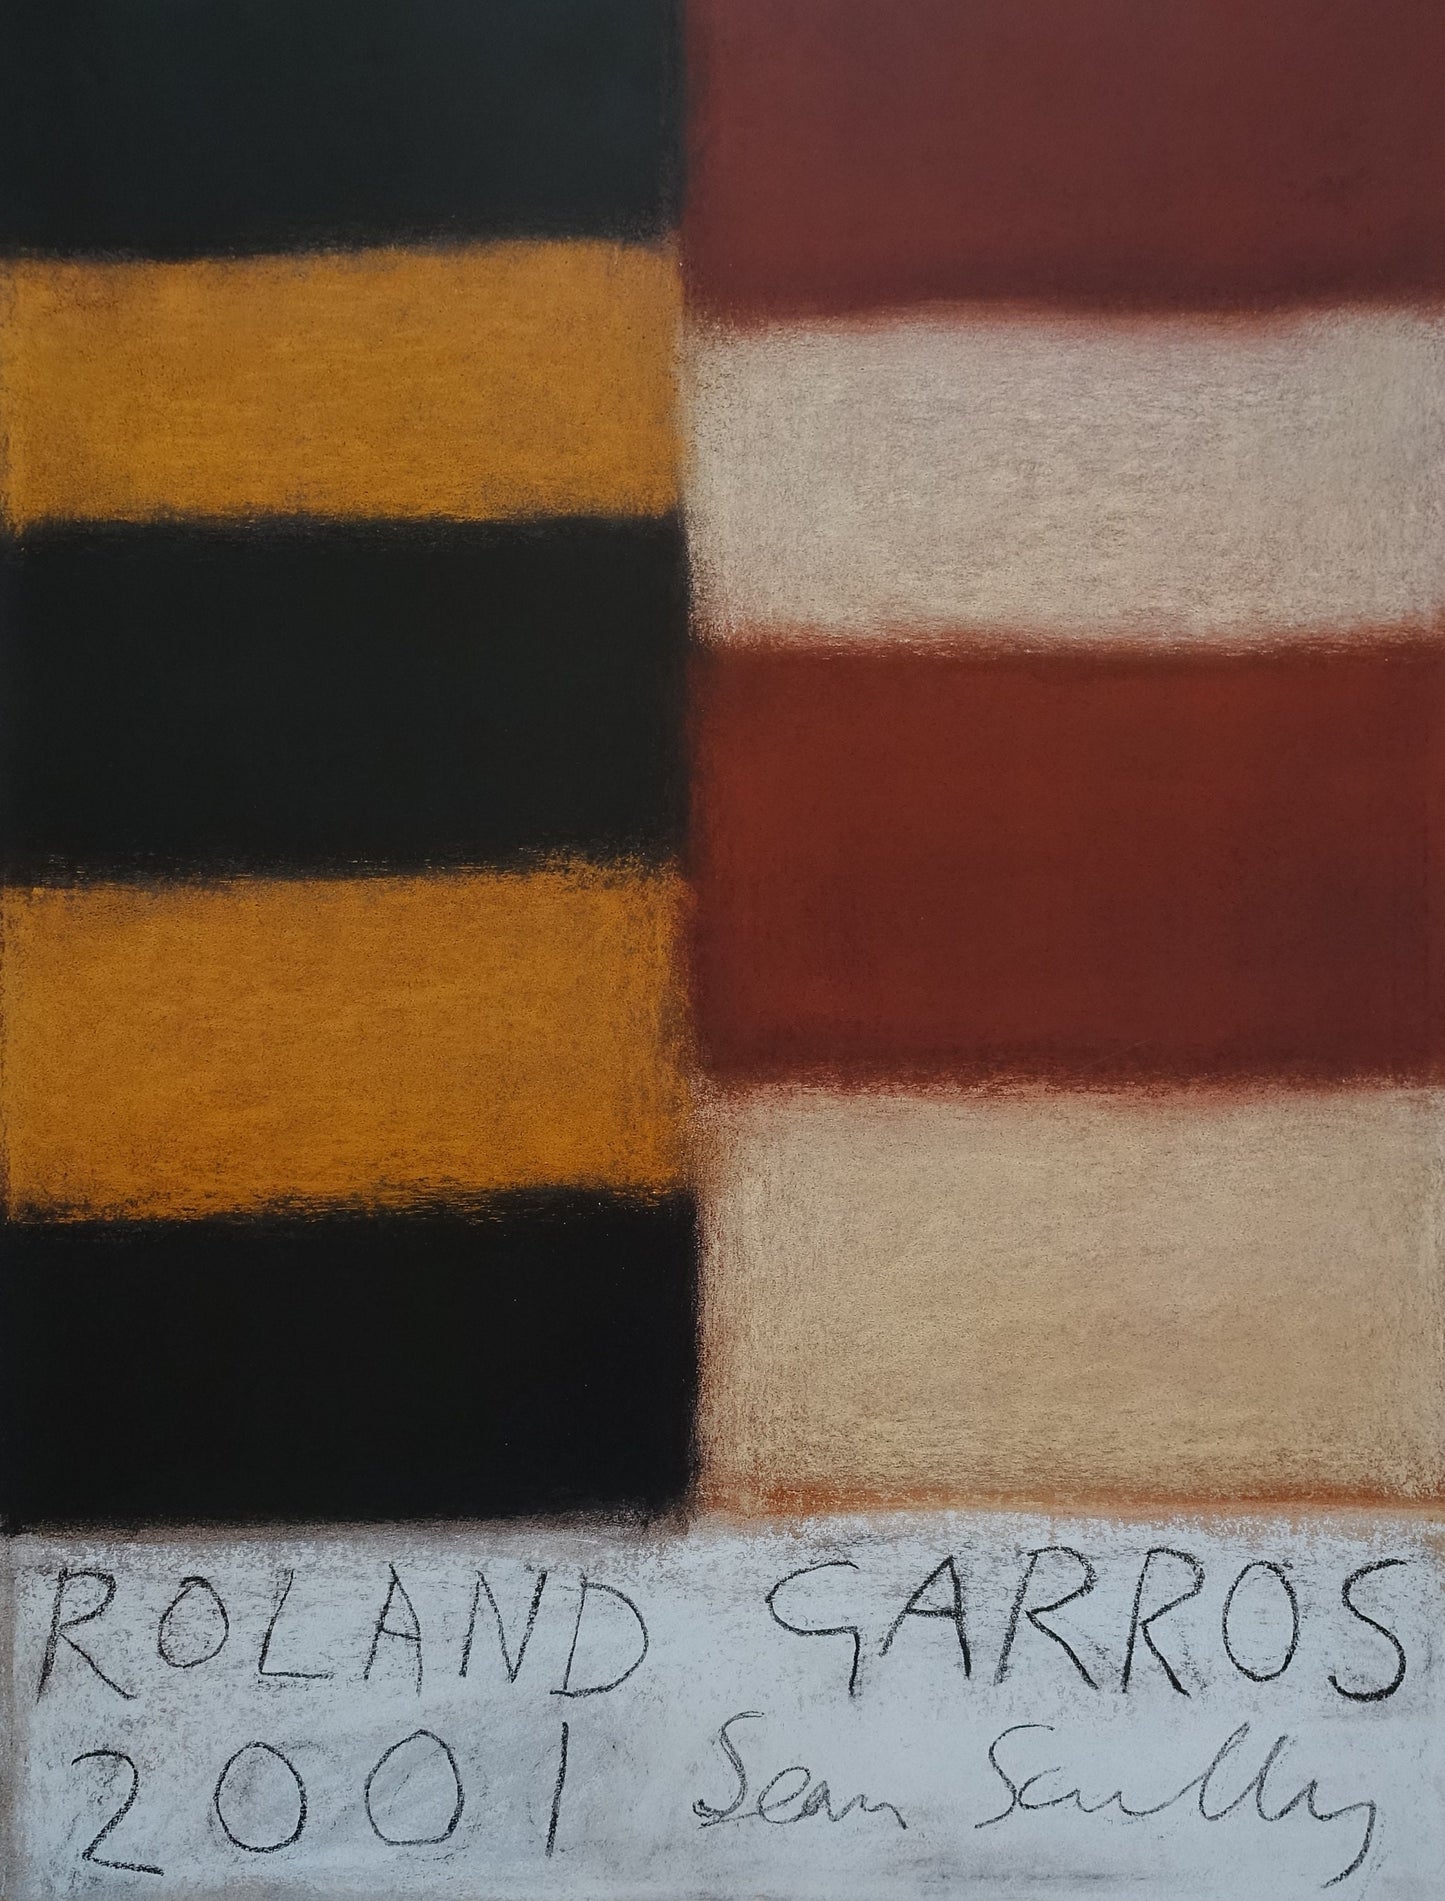 2001 Roland Garros French Open Poster by Sean Scully - Original Vintage Poster